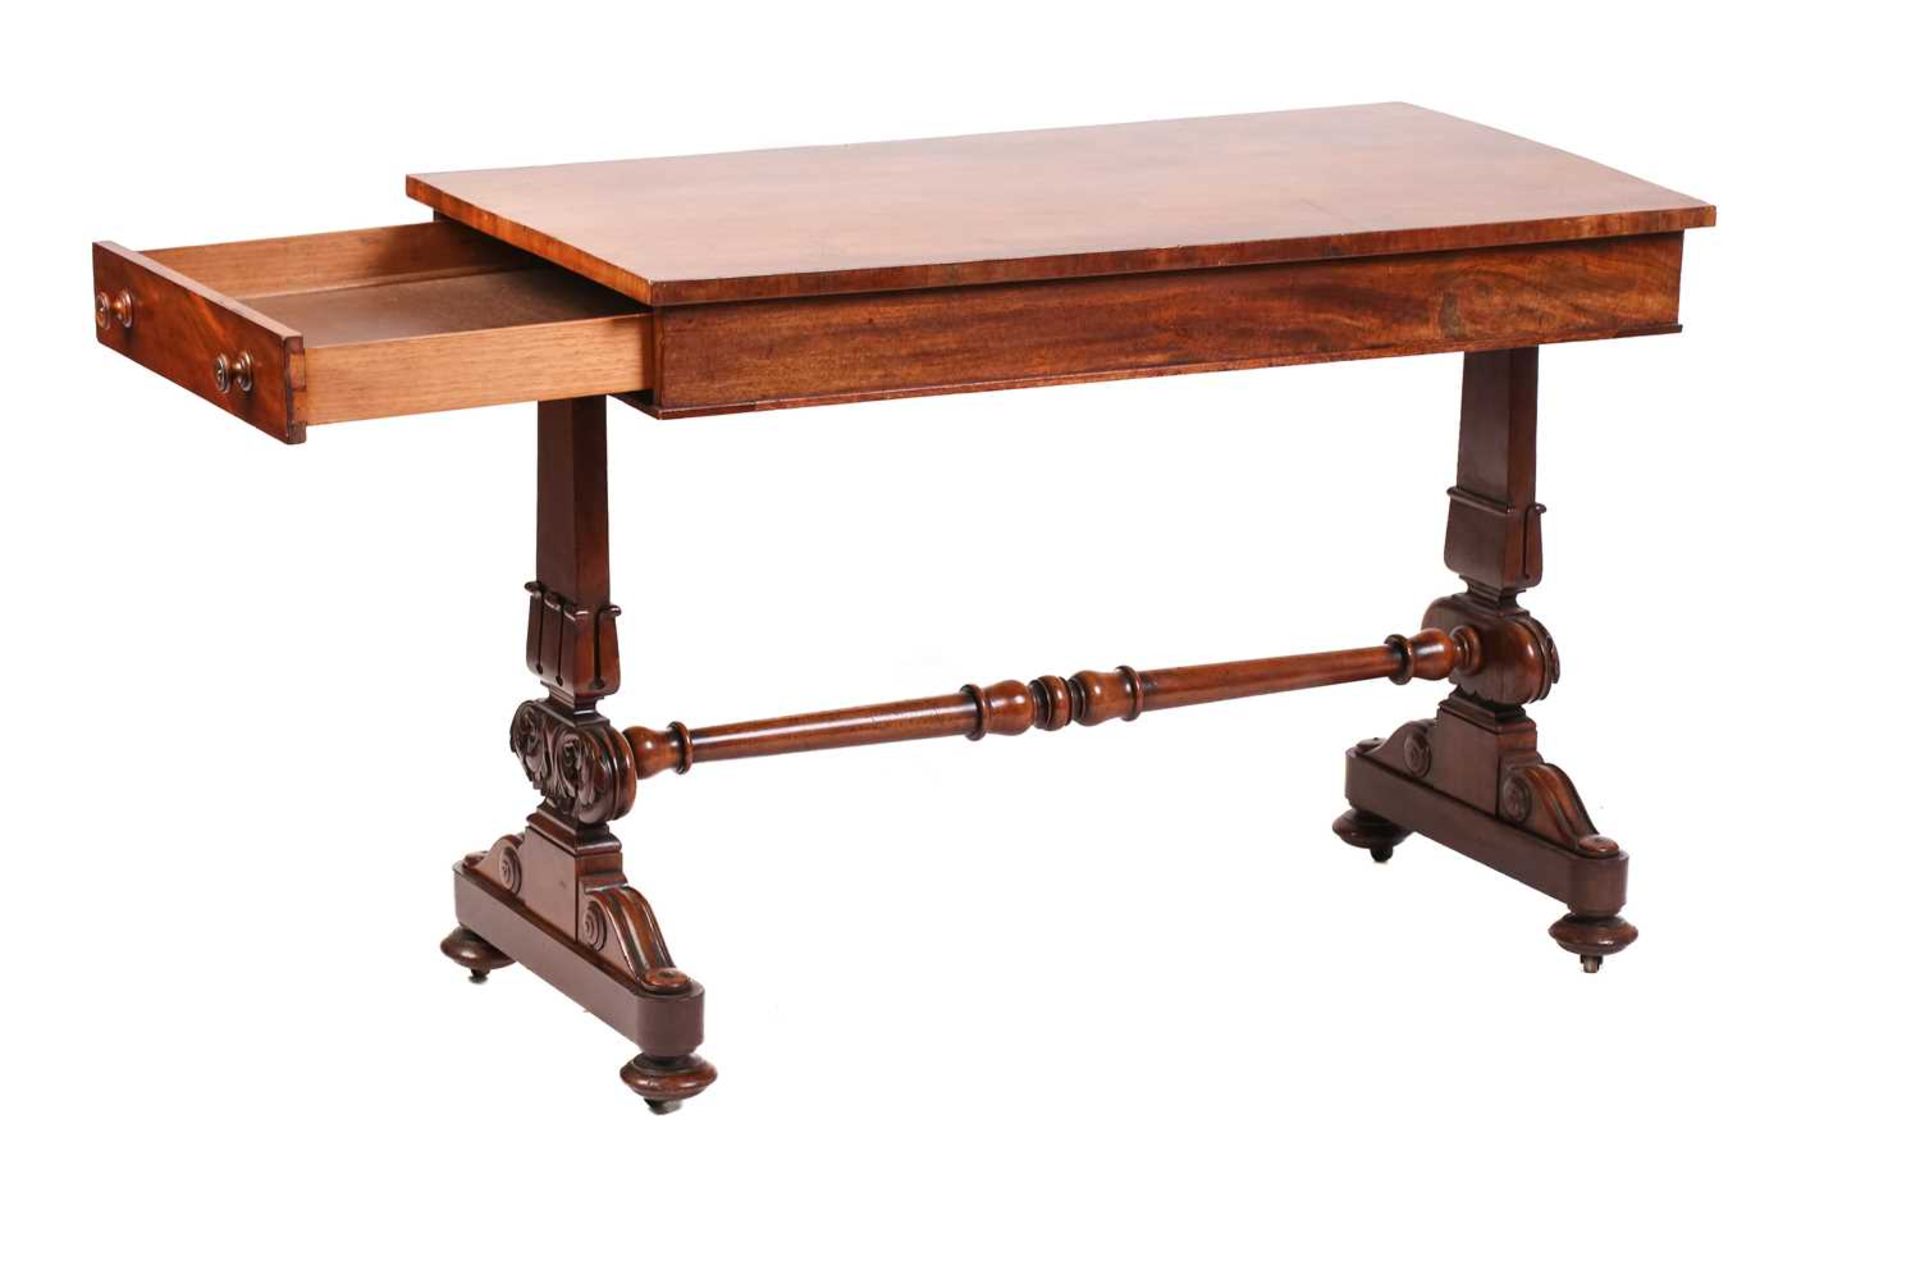 An early Victorian mahogany rectangular side table with unusually configured end frieze drawers on - Image 4 of 8